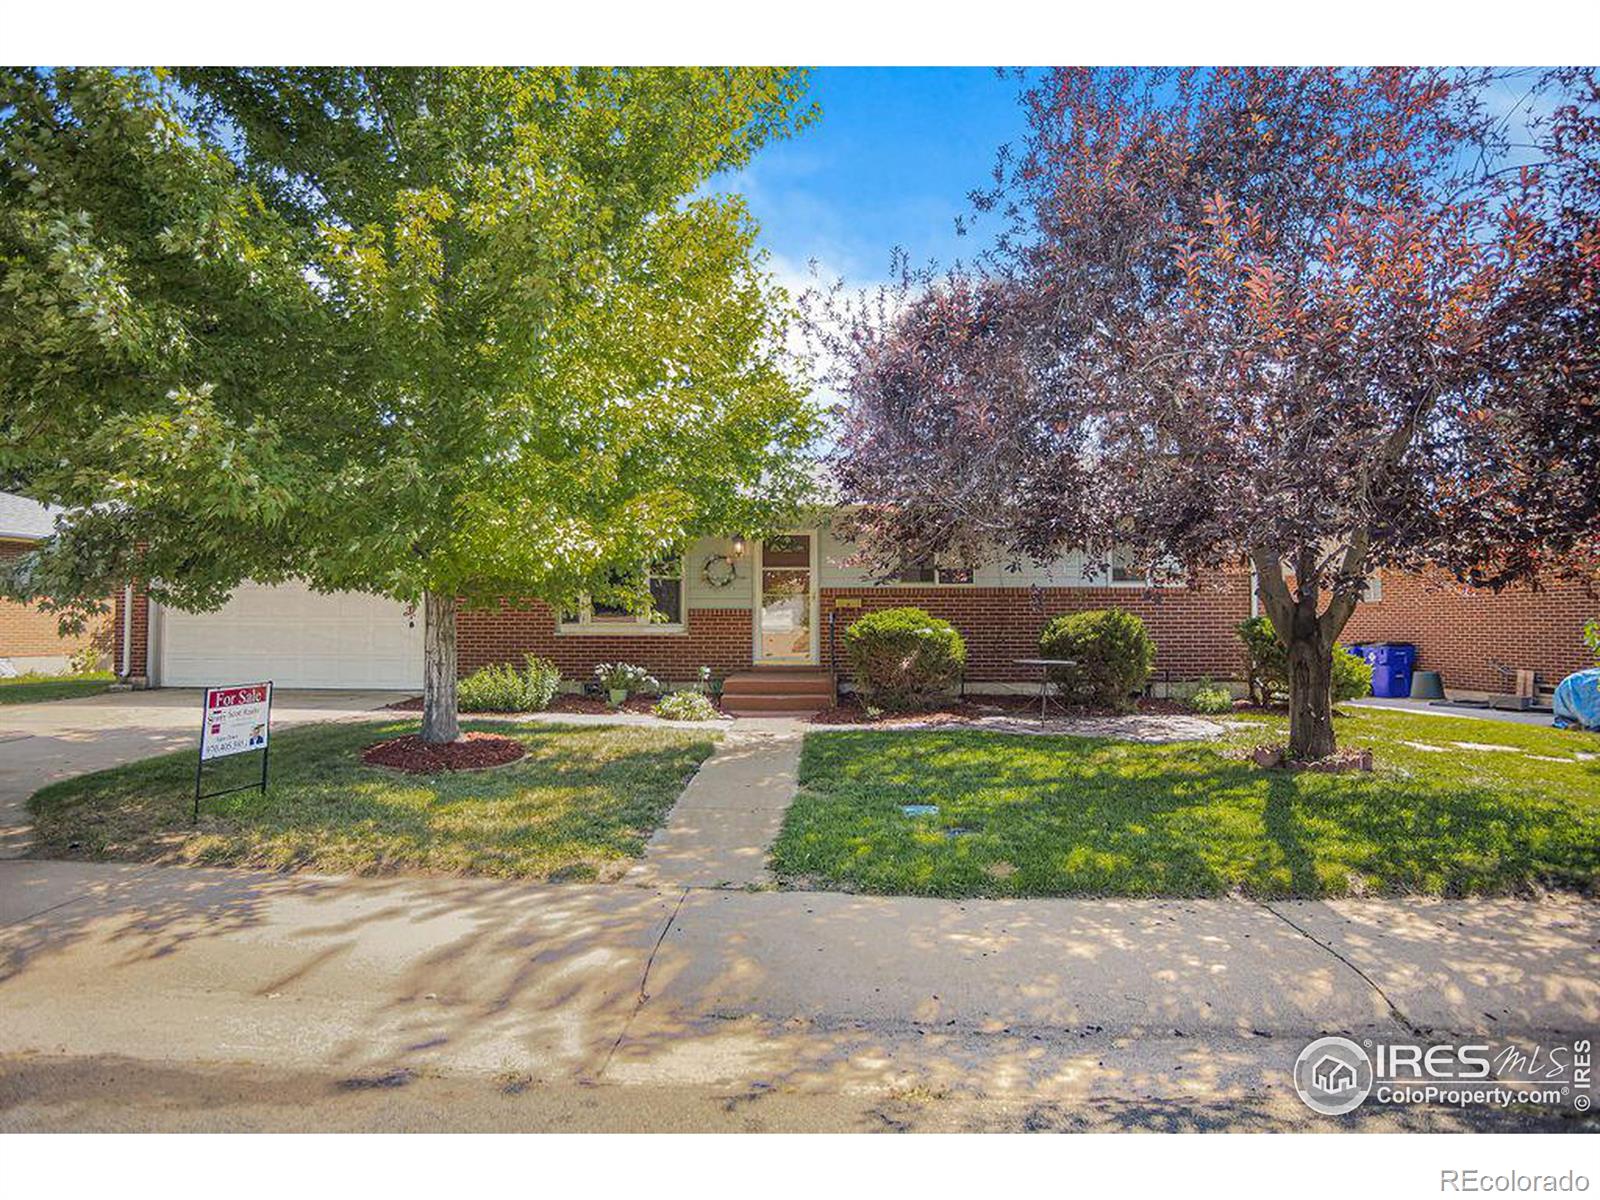 2522  22nd Avenue, greeley MLS: 456789994933 Beds: 5 Baths: 4 Price: $435,000